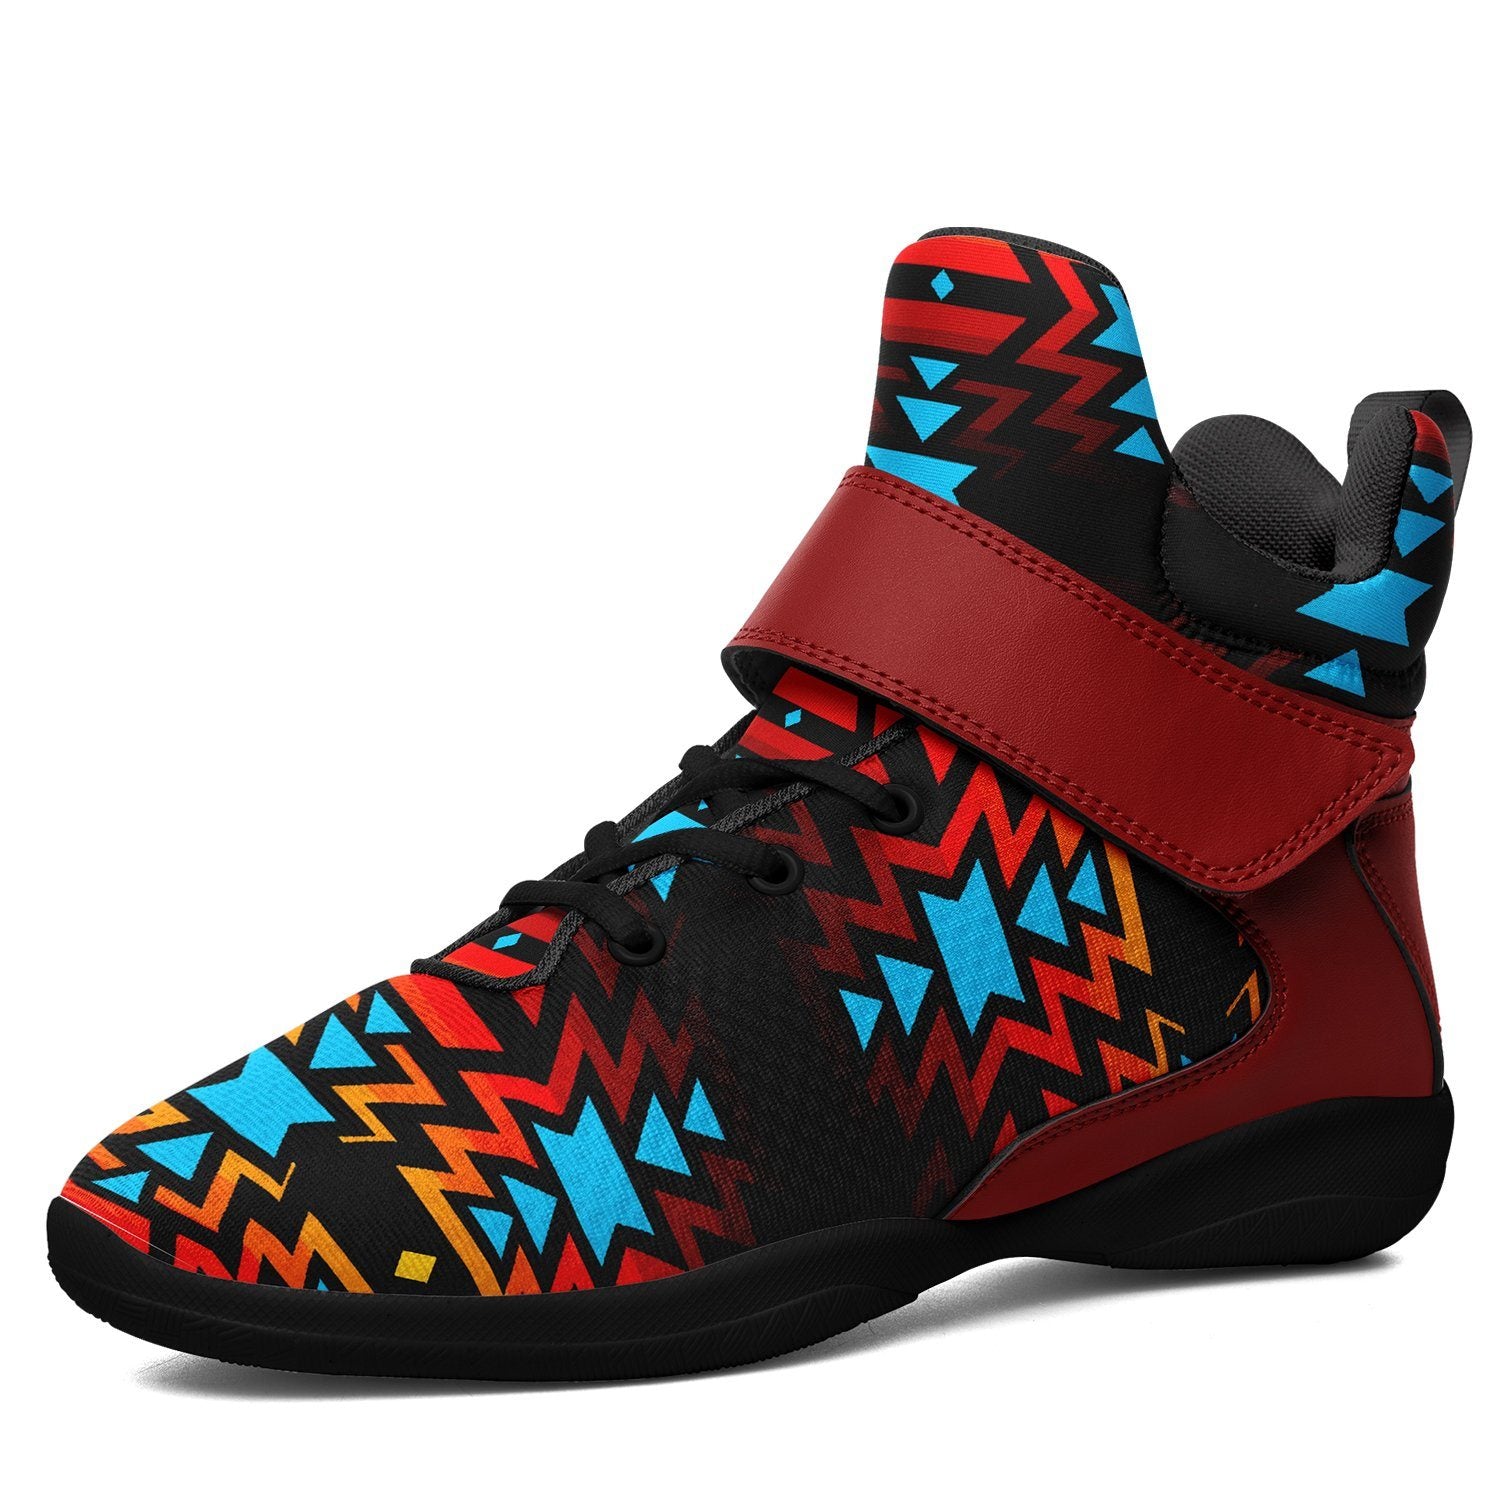 Black Fire and Turquoise Ipottaa Basketball / Sport High Top Shoes 49 Dzine US Women 4.5 / US Youth 3.5 / EUR 35 Black Sole with Dark Red Strap 